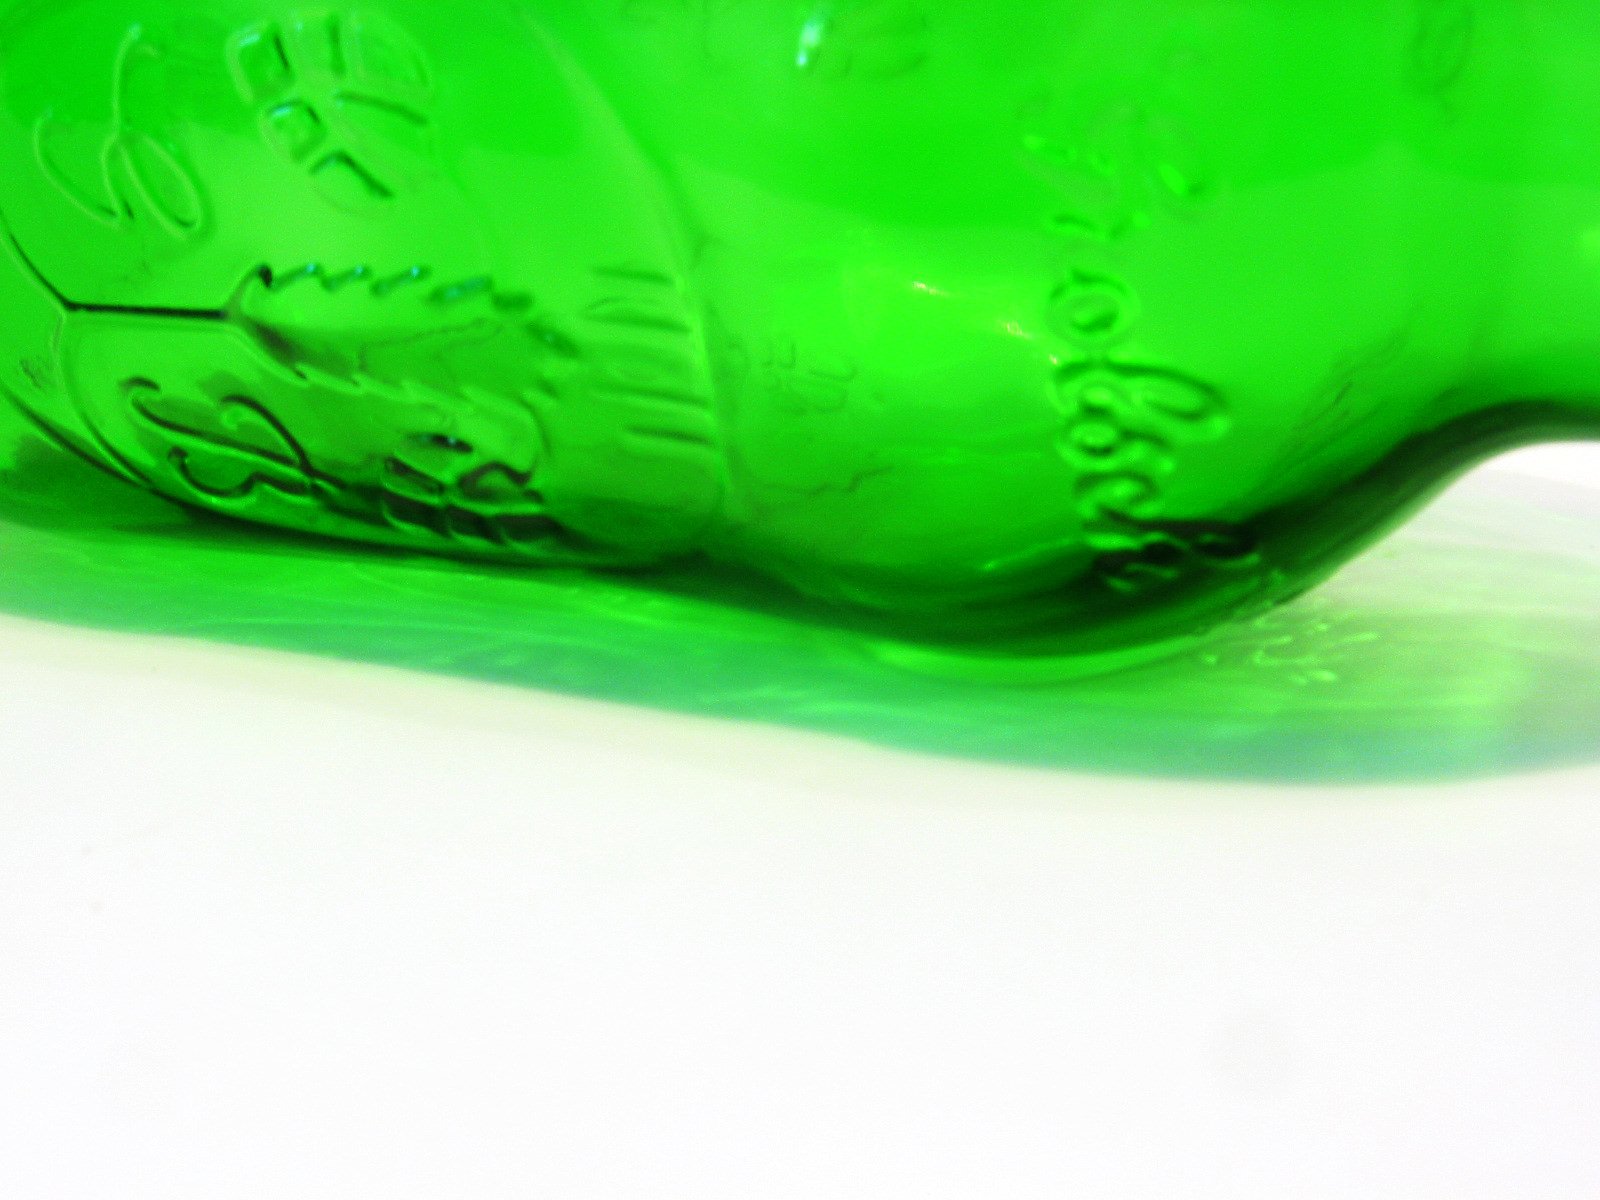 a green bottle that is sitting on the floor